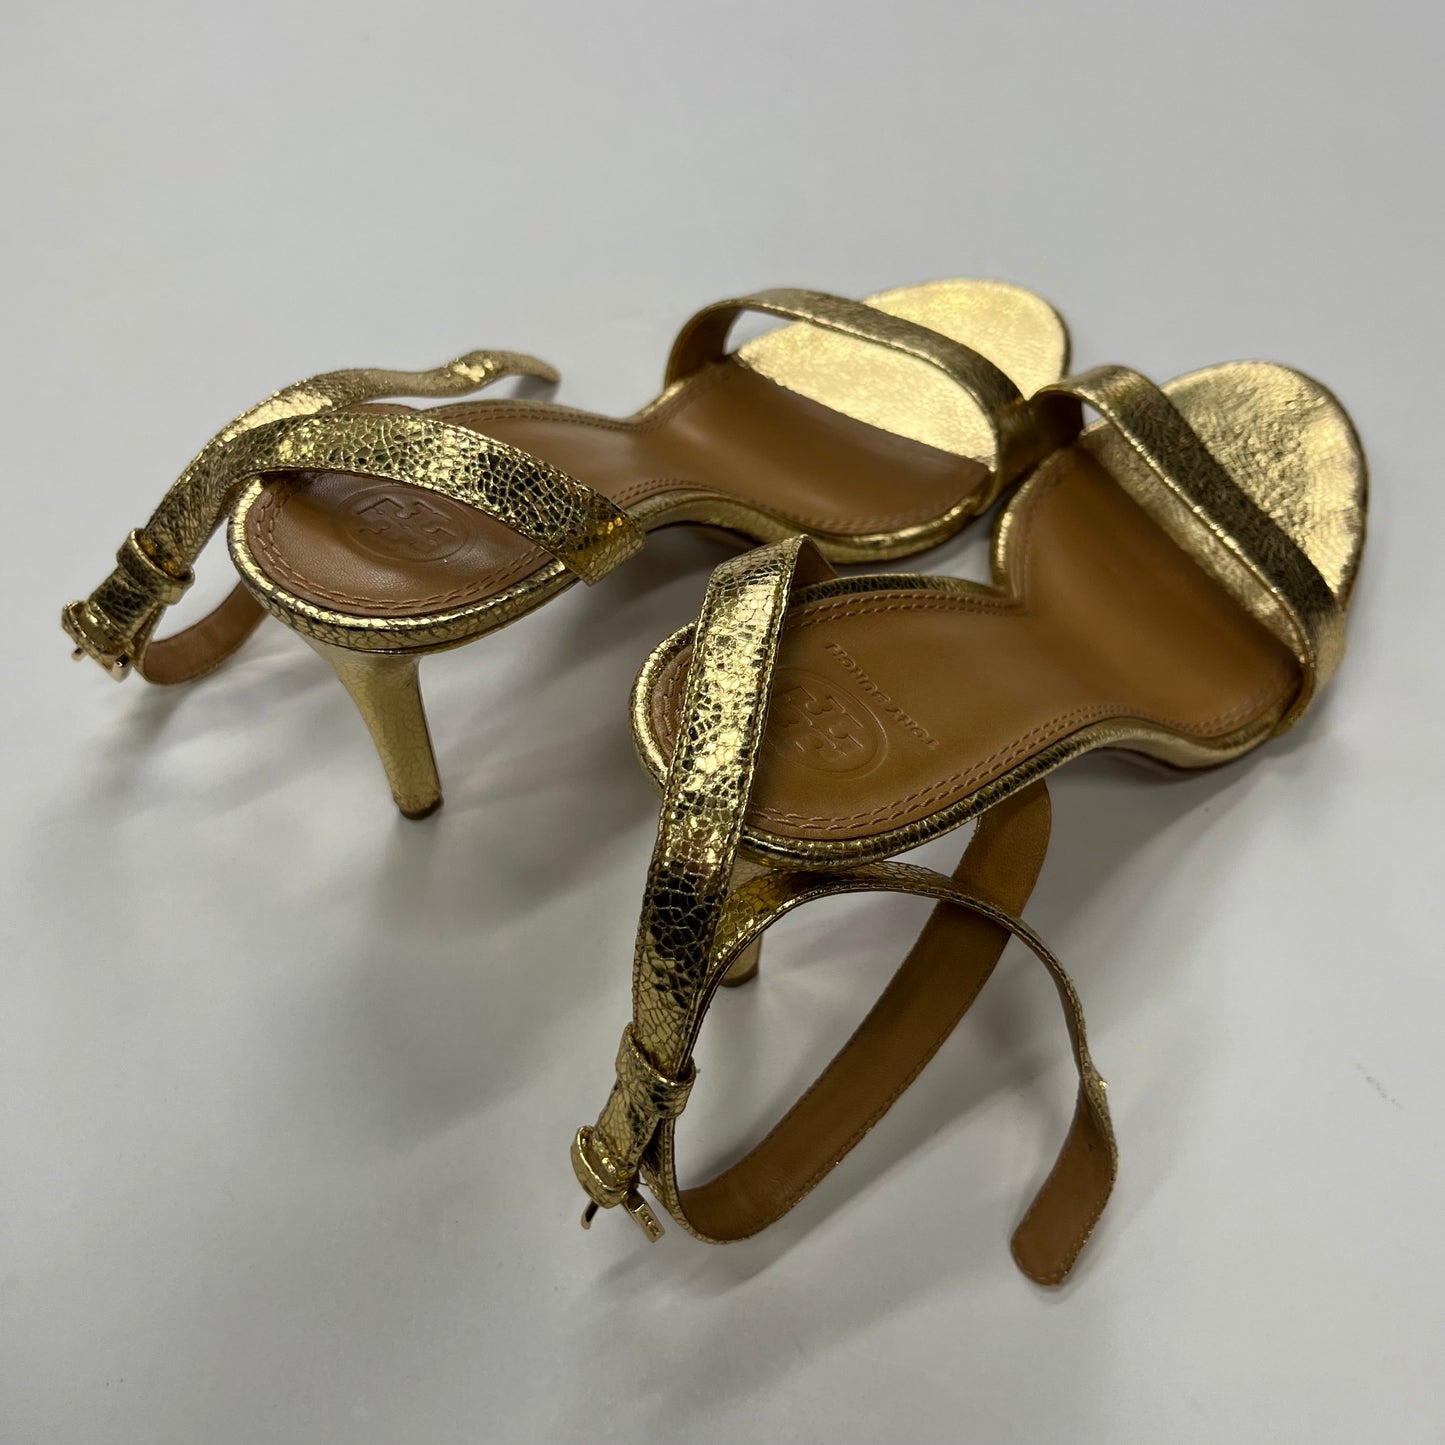 Gold Shoes Heels D Orsay Tory Burch, Size 9.5